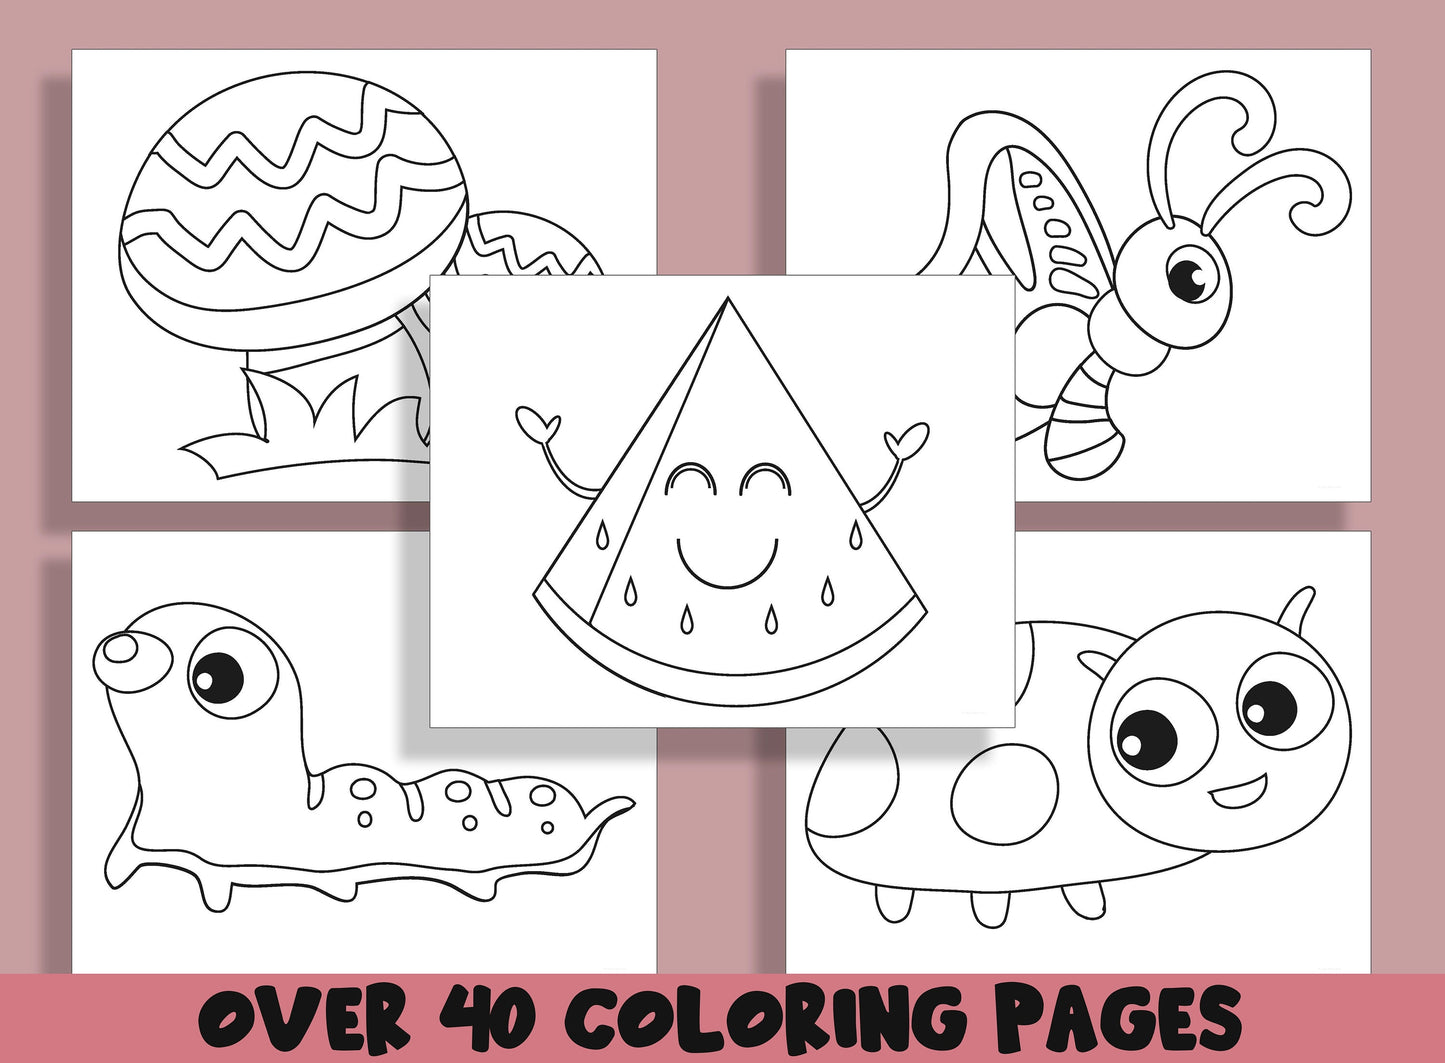 40 Preschool Coloring Pages, Suitable for Toddlers, Preschool, Kindergarten and Early Elementary Kids.